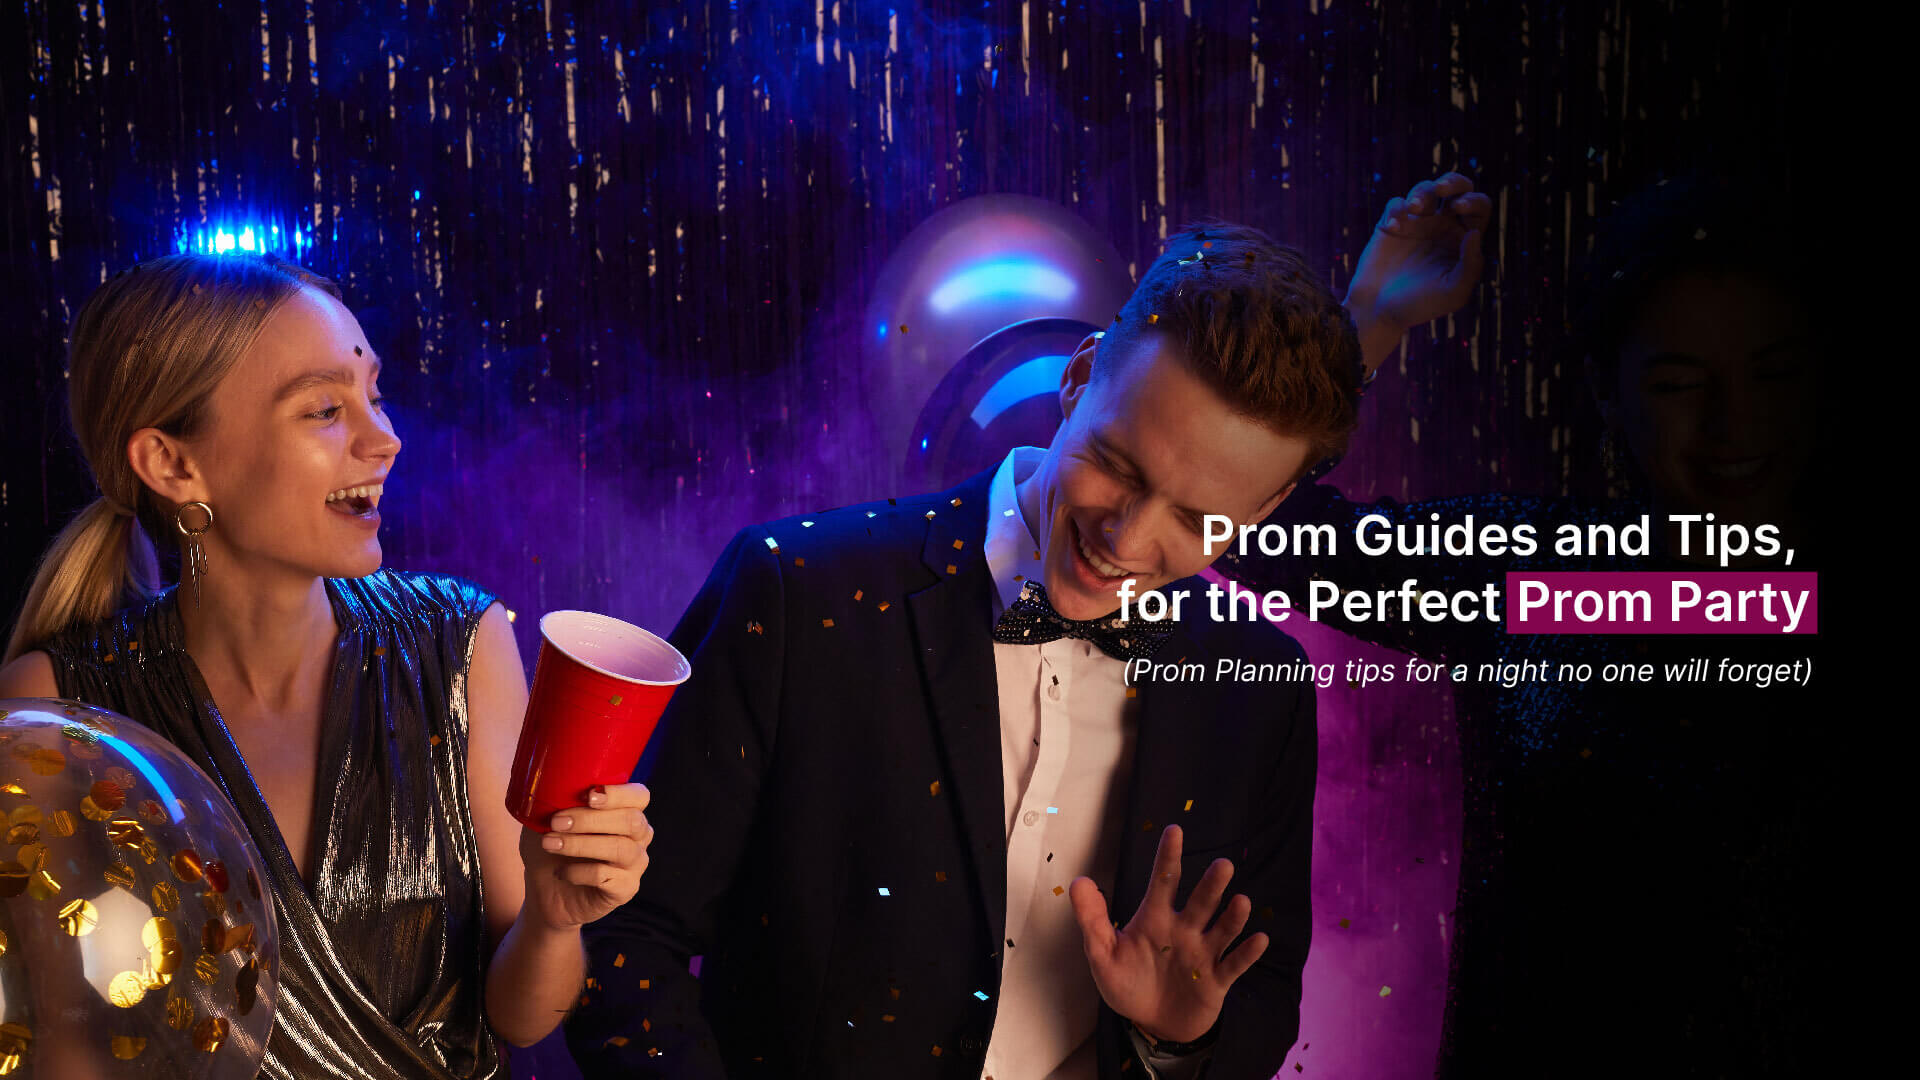 Prom Guides and Tips, for the Perfect Prom Party